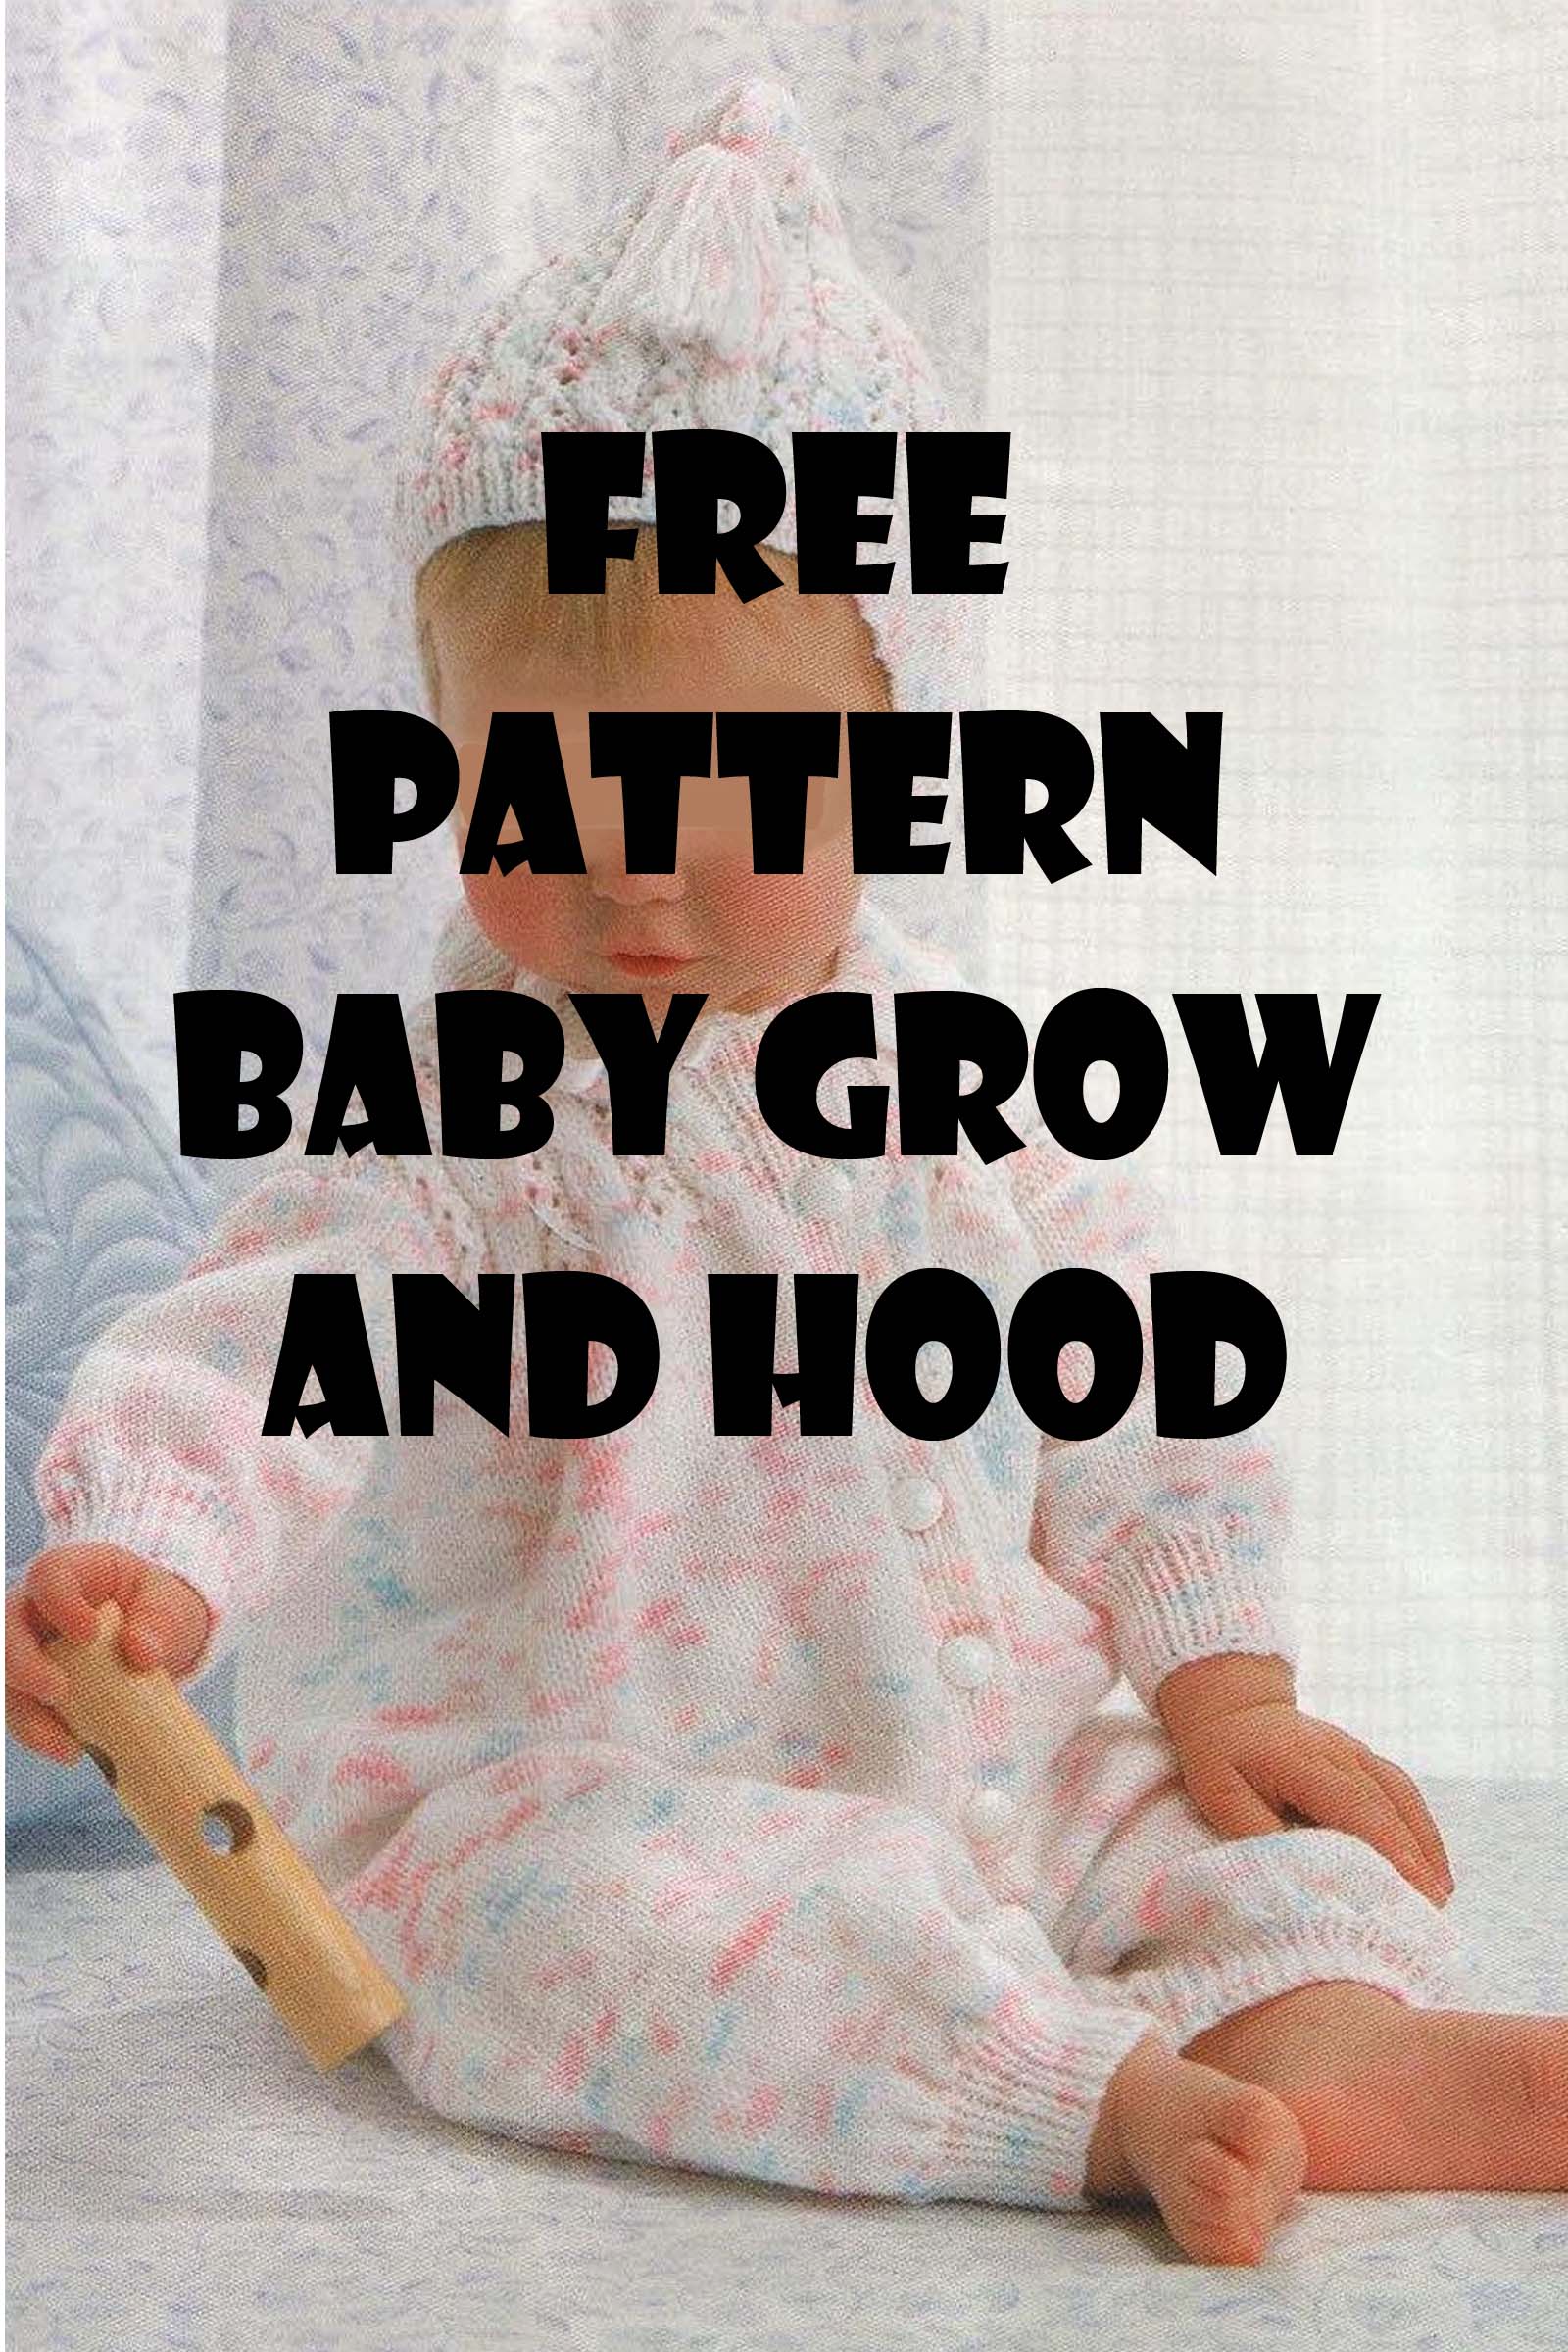 Download Free knitting pattern to knit a Baby Grow and Hood